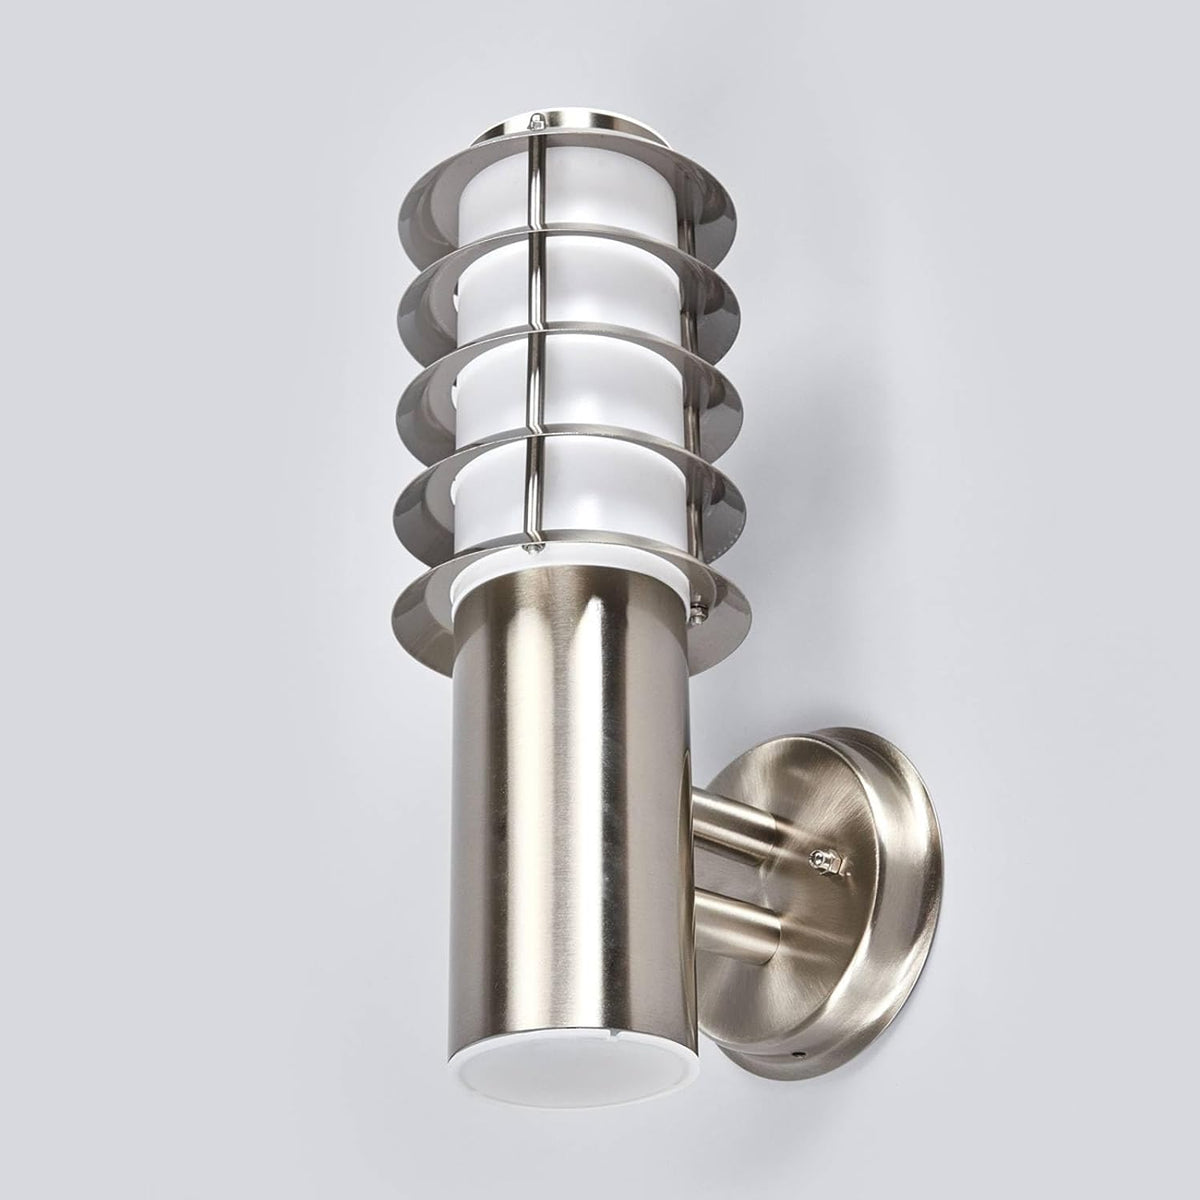 Outdoor Wall Light in Silver Made of Stainless Steel (1 Light Source, E27) Plug in Wall lights for Exterior/Interior Walls